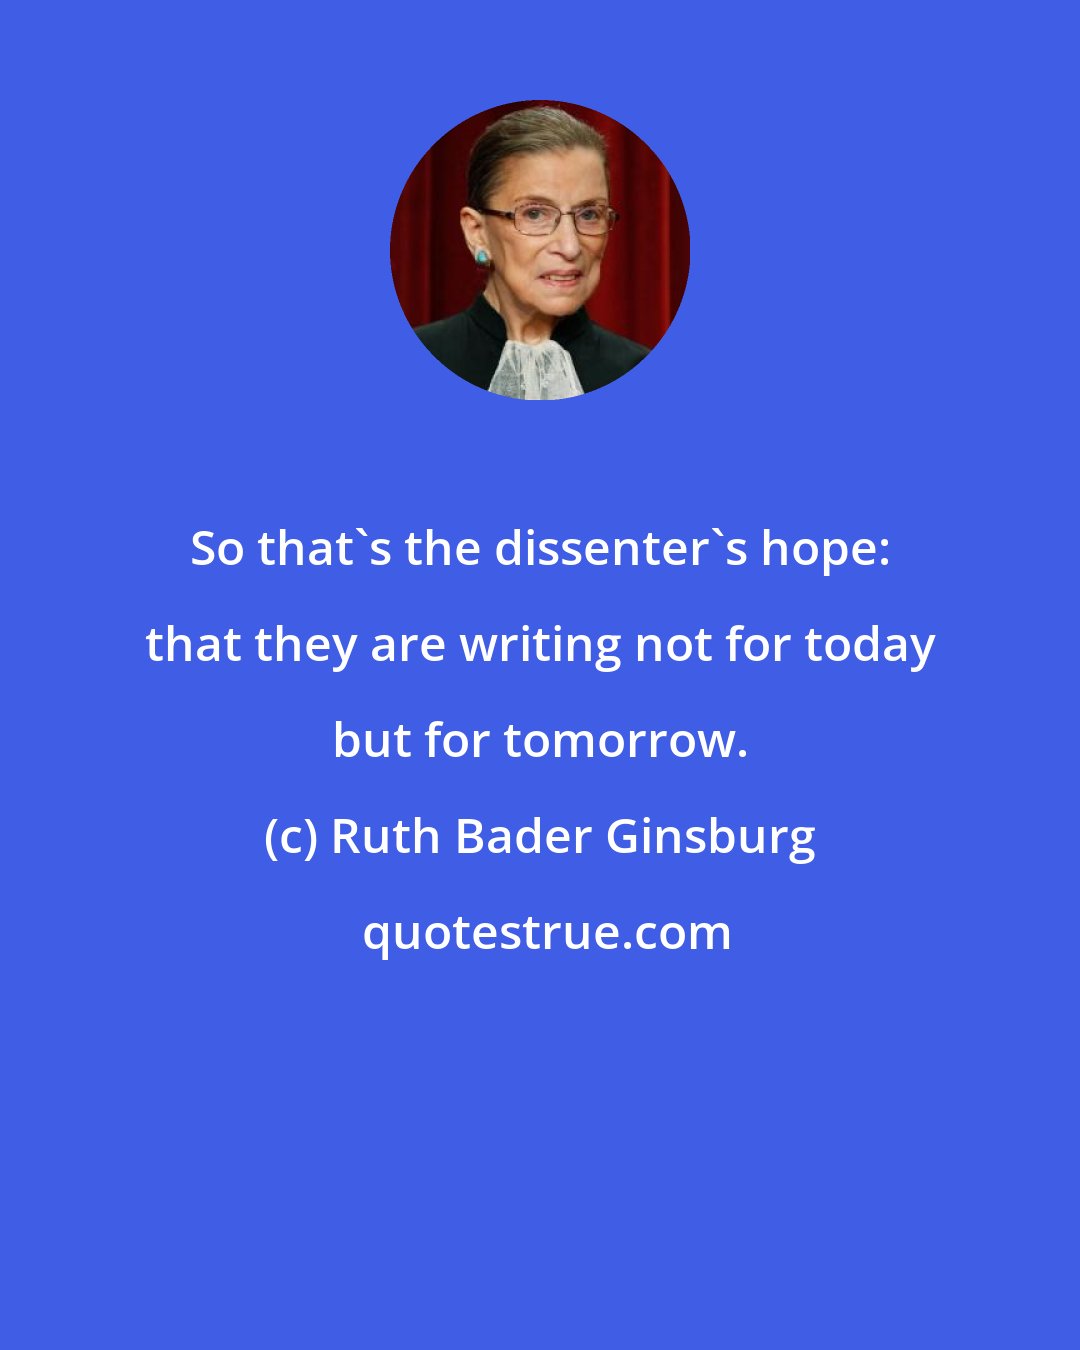 Ruth Bader Ginsburg: So that's the dissenter's hope: that they are writing not for today but for tomorrow.